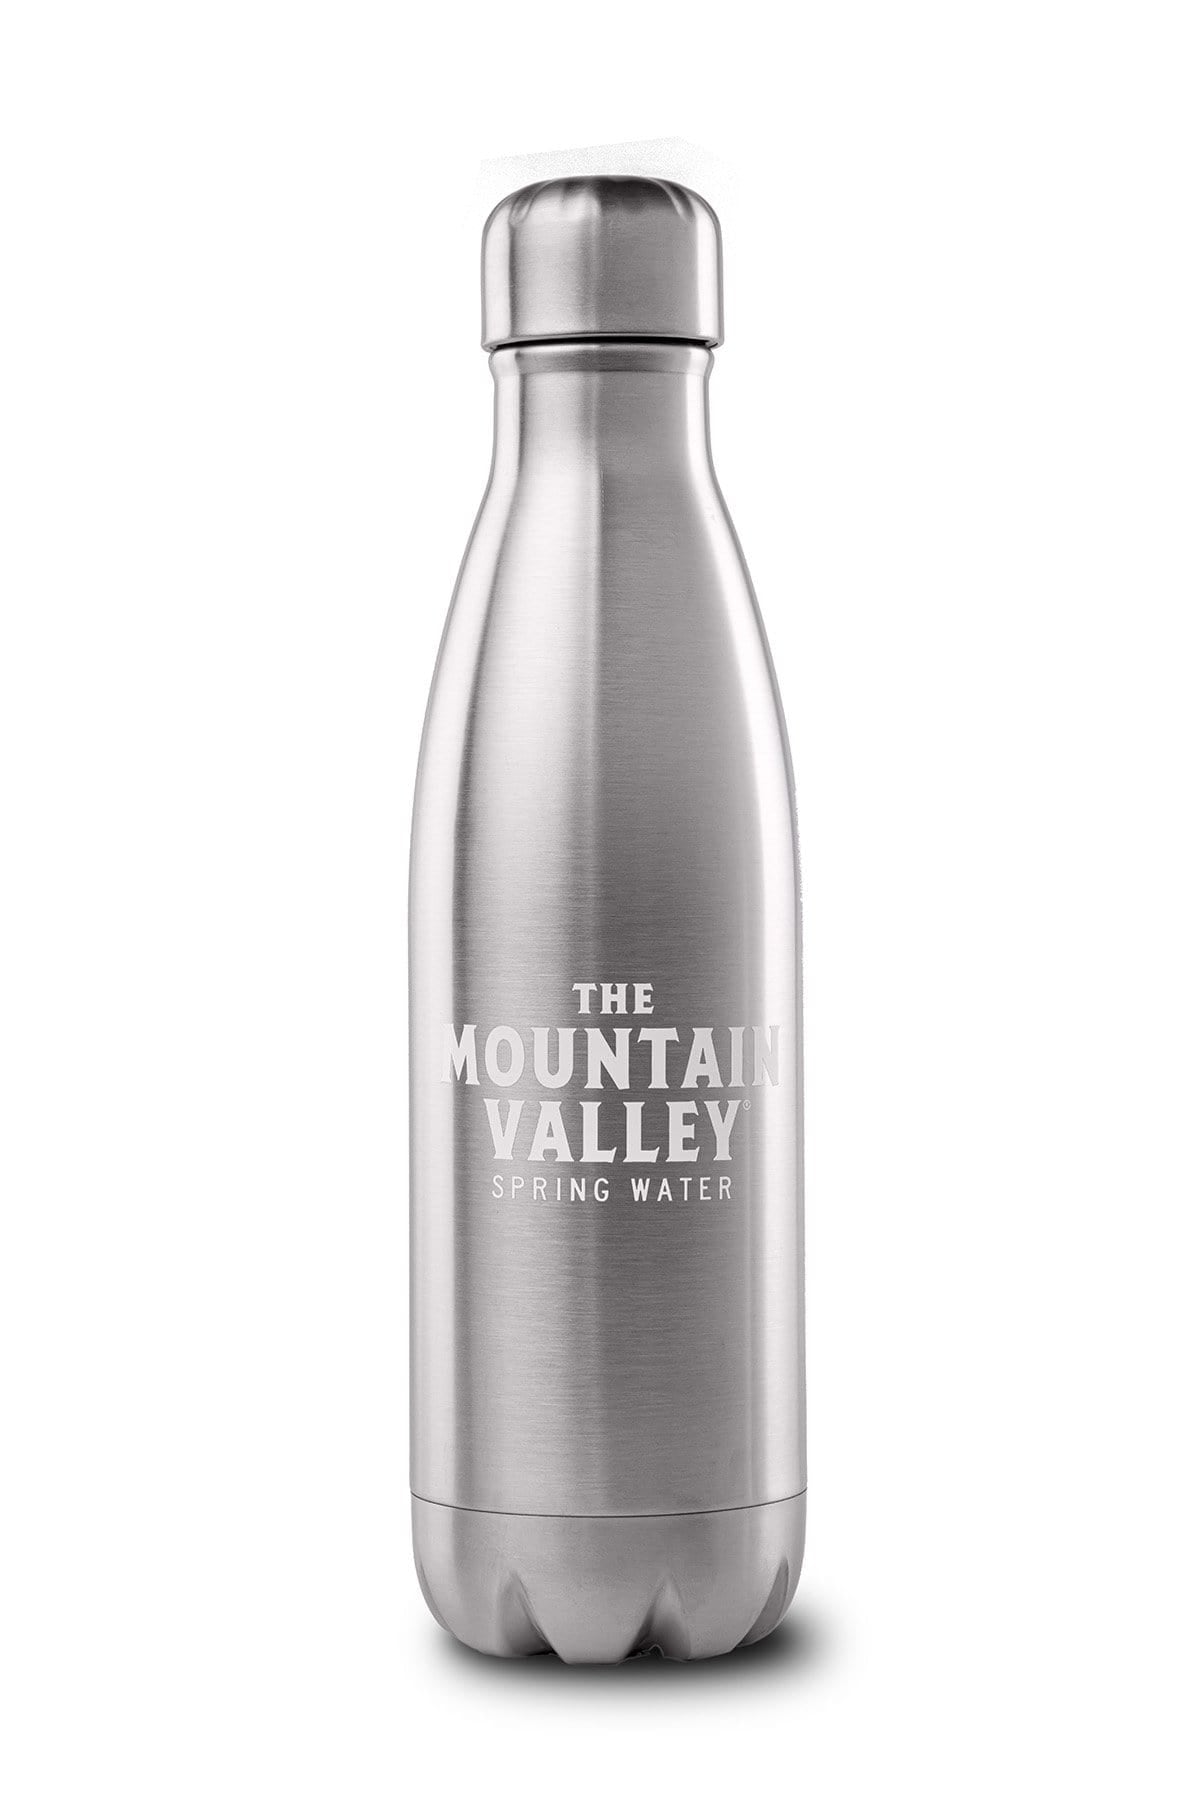 Labelless Water Bottles : montbest